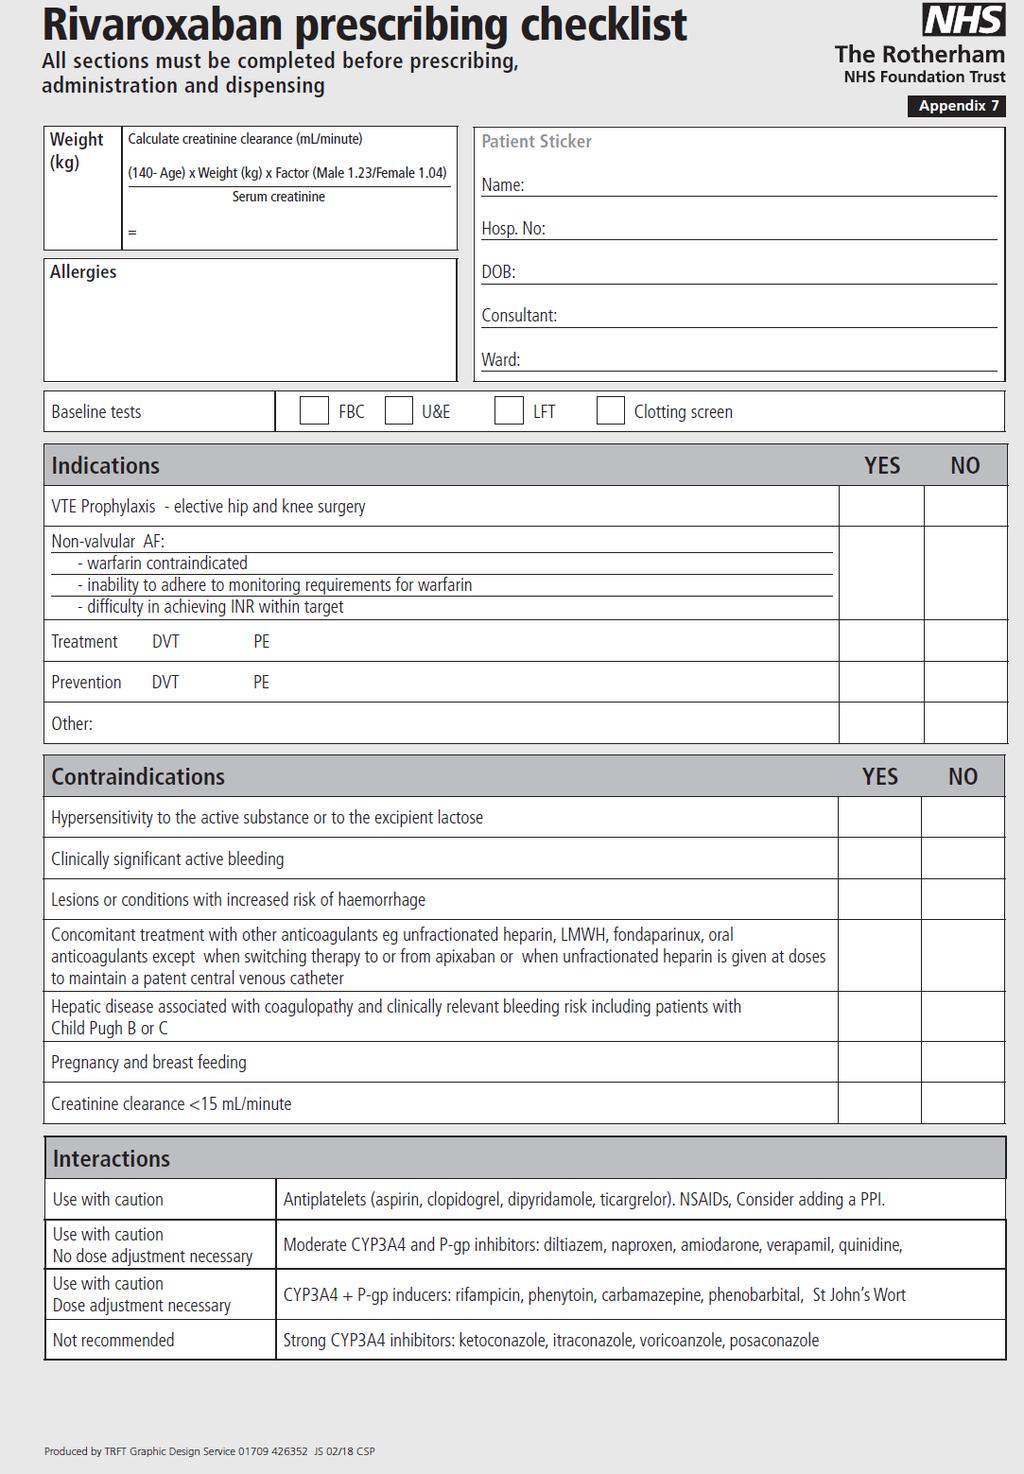 APPENDIX 7 Do not use or copy this example an original version of this form is available at Appendix